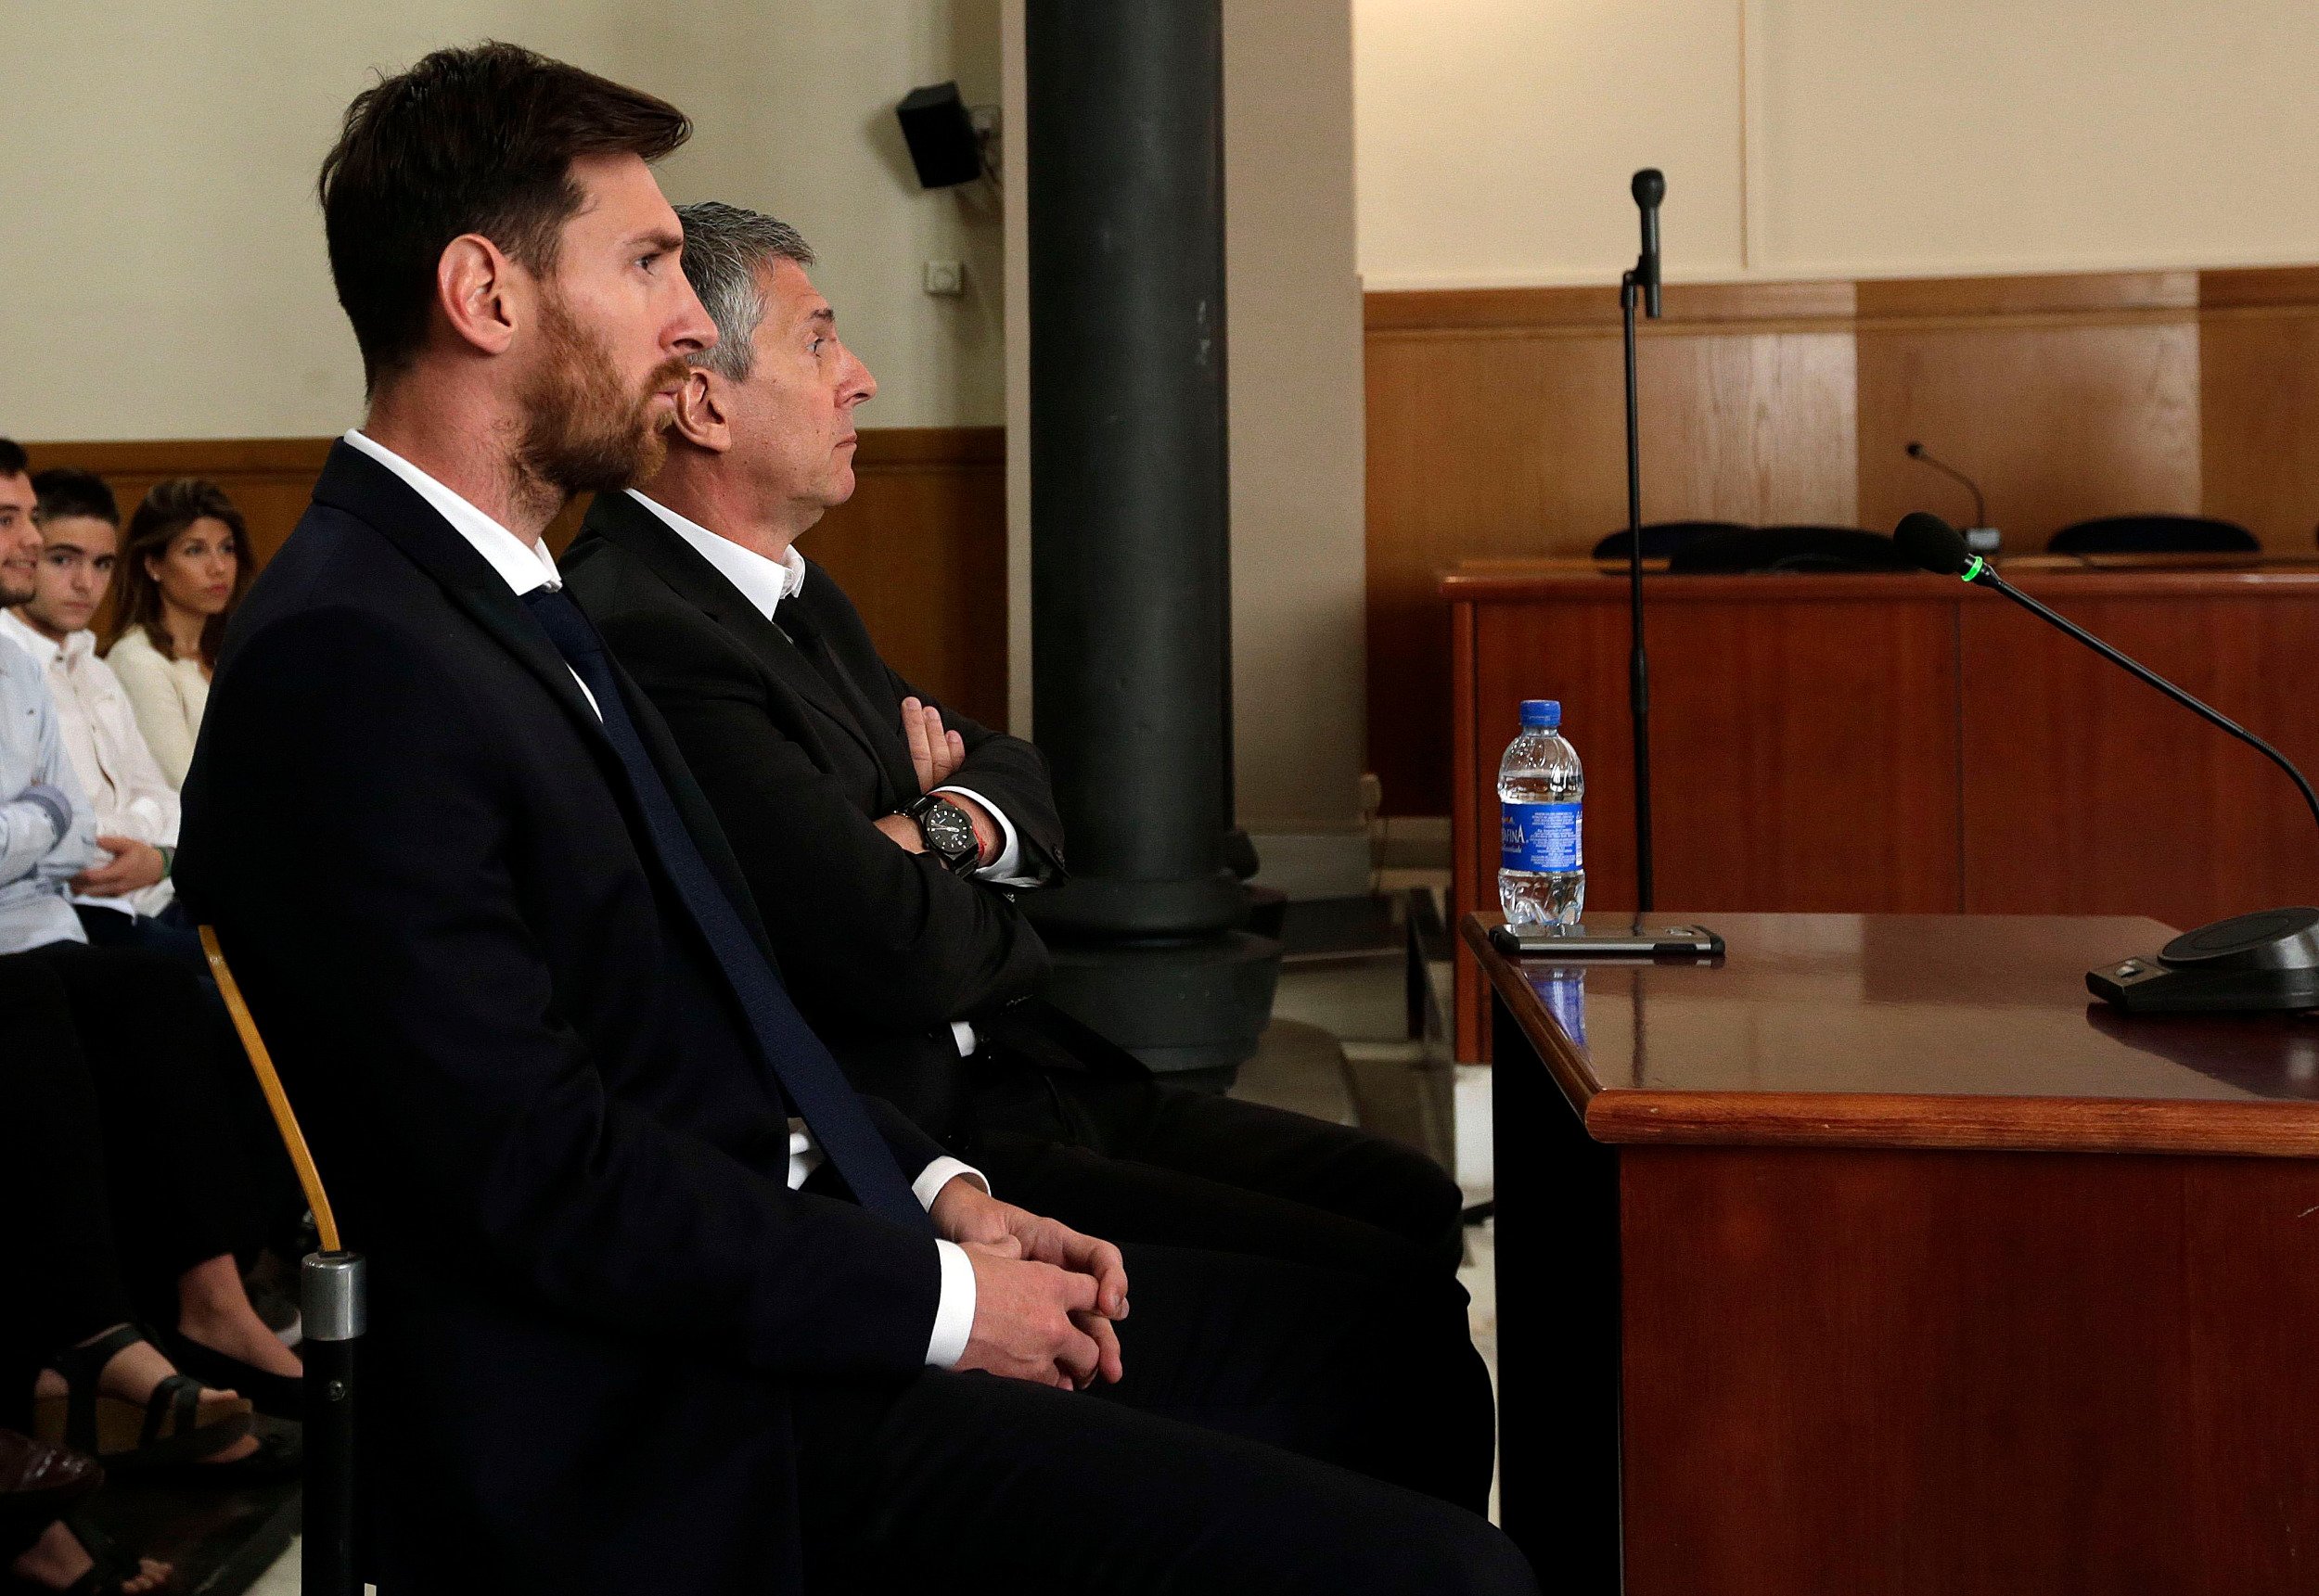 Key moment in Barça drama ahead when Messi's father arrives to negotiate